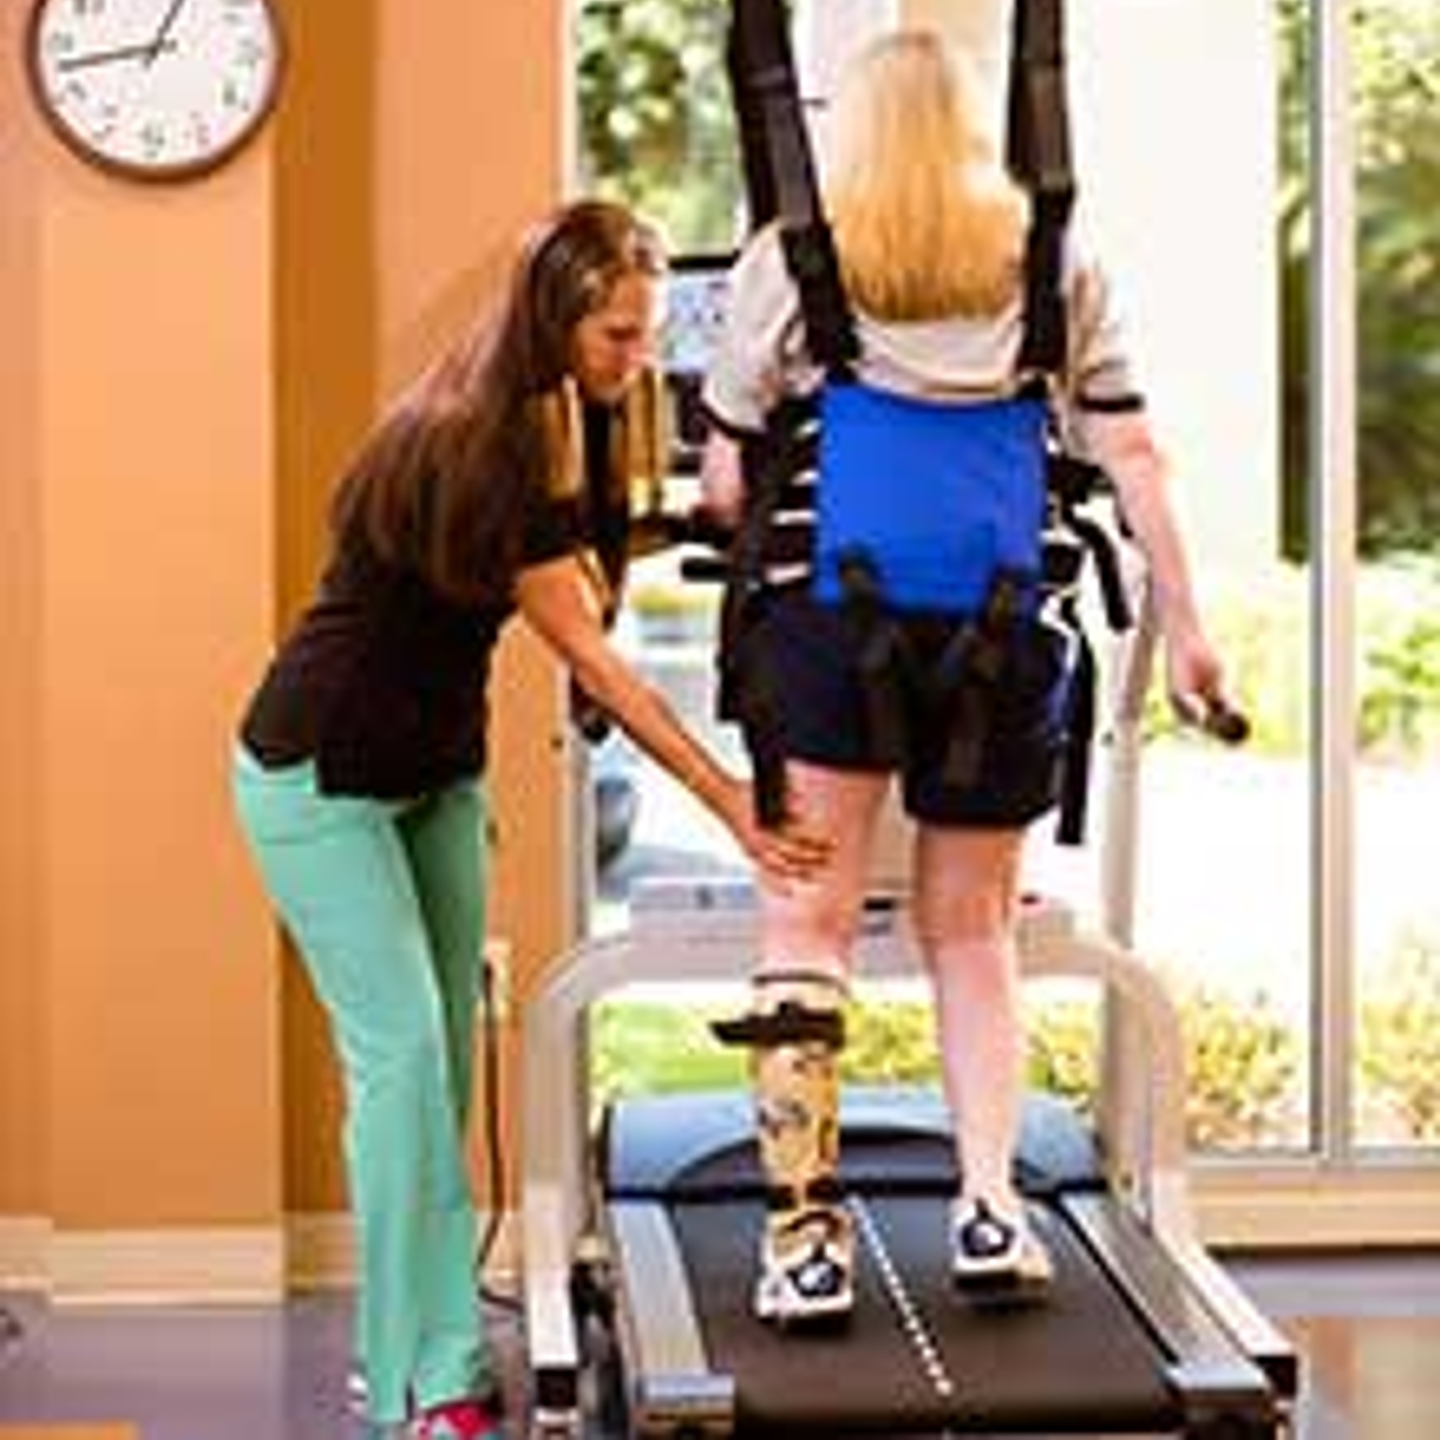 Physical therapist assisting a patient on a treadmill.